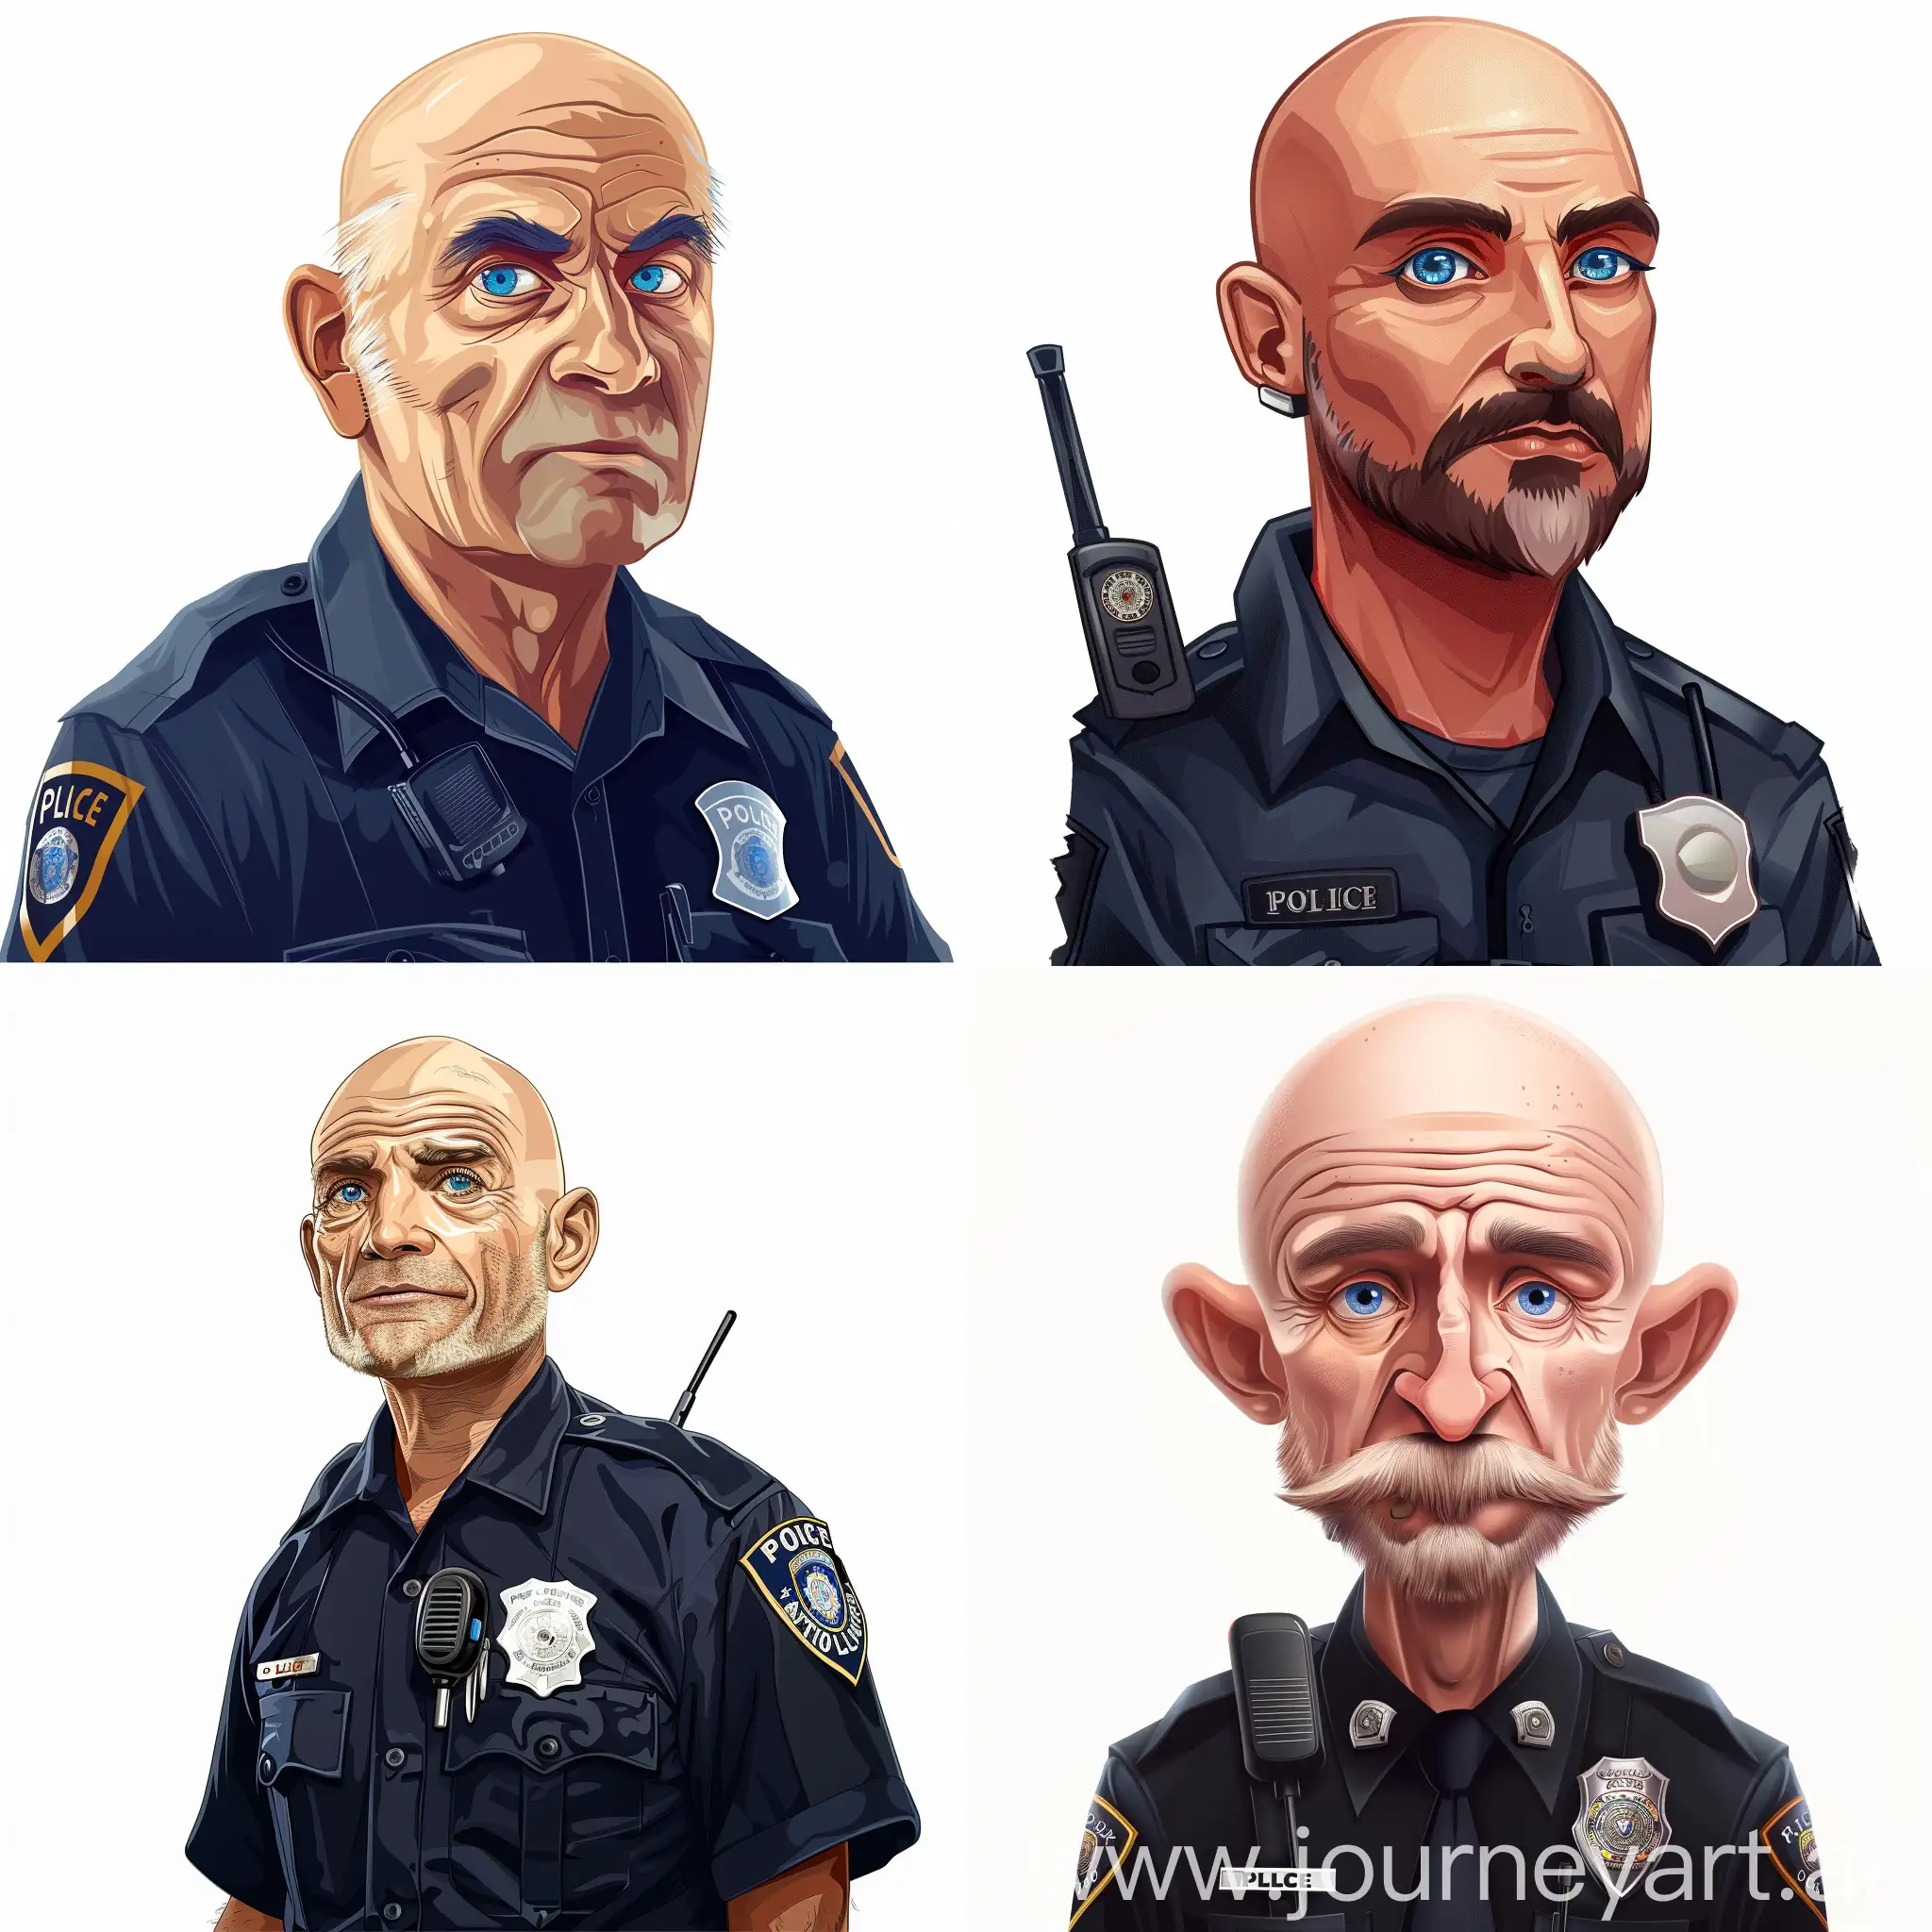 Bald-Persian-Policeman-with-Police-Walkie-Realistic-Illustration-with-Blue-Eyes